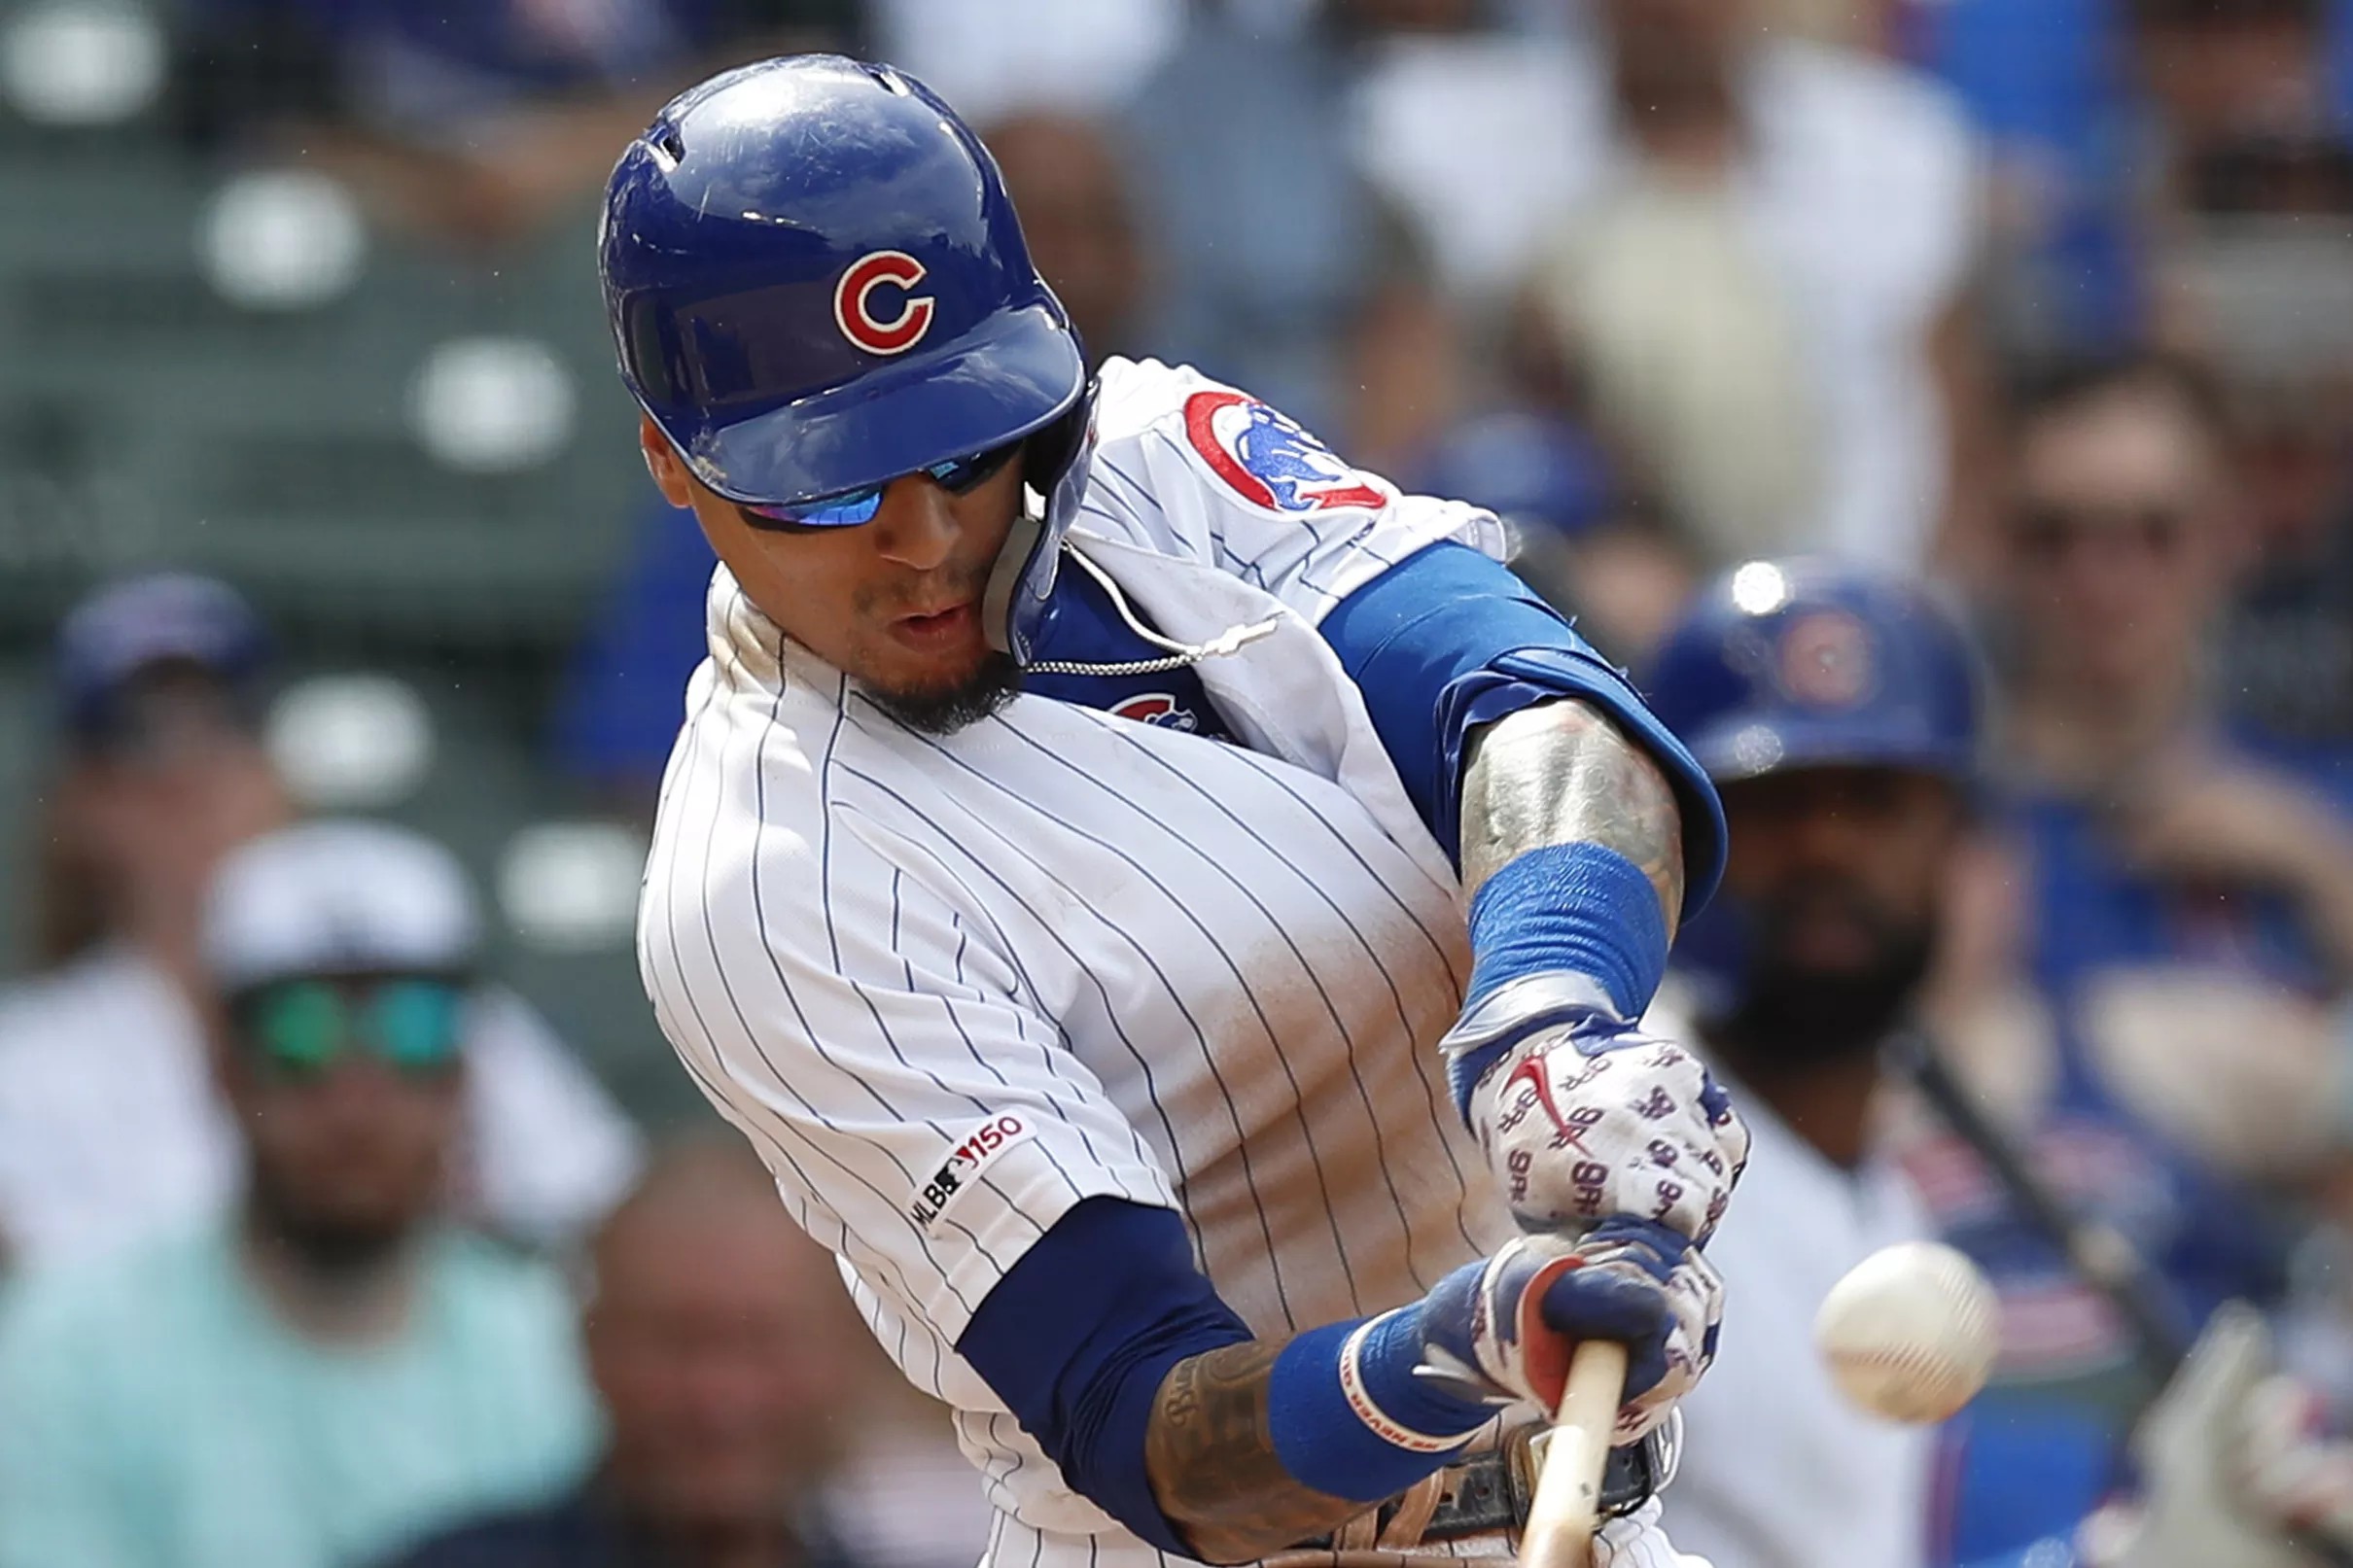 Javier Báez hit his 100th home run Sunday... on an 02 pitch